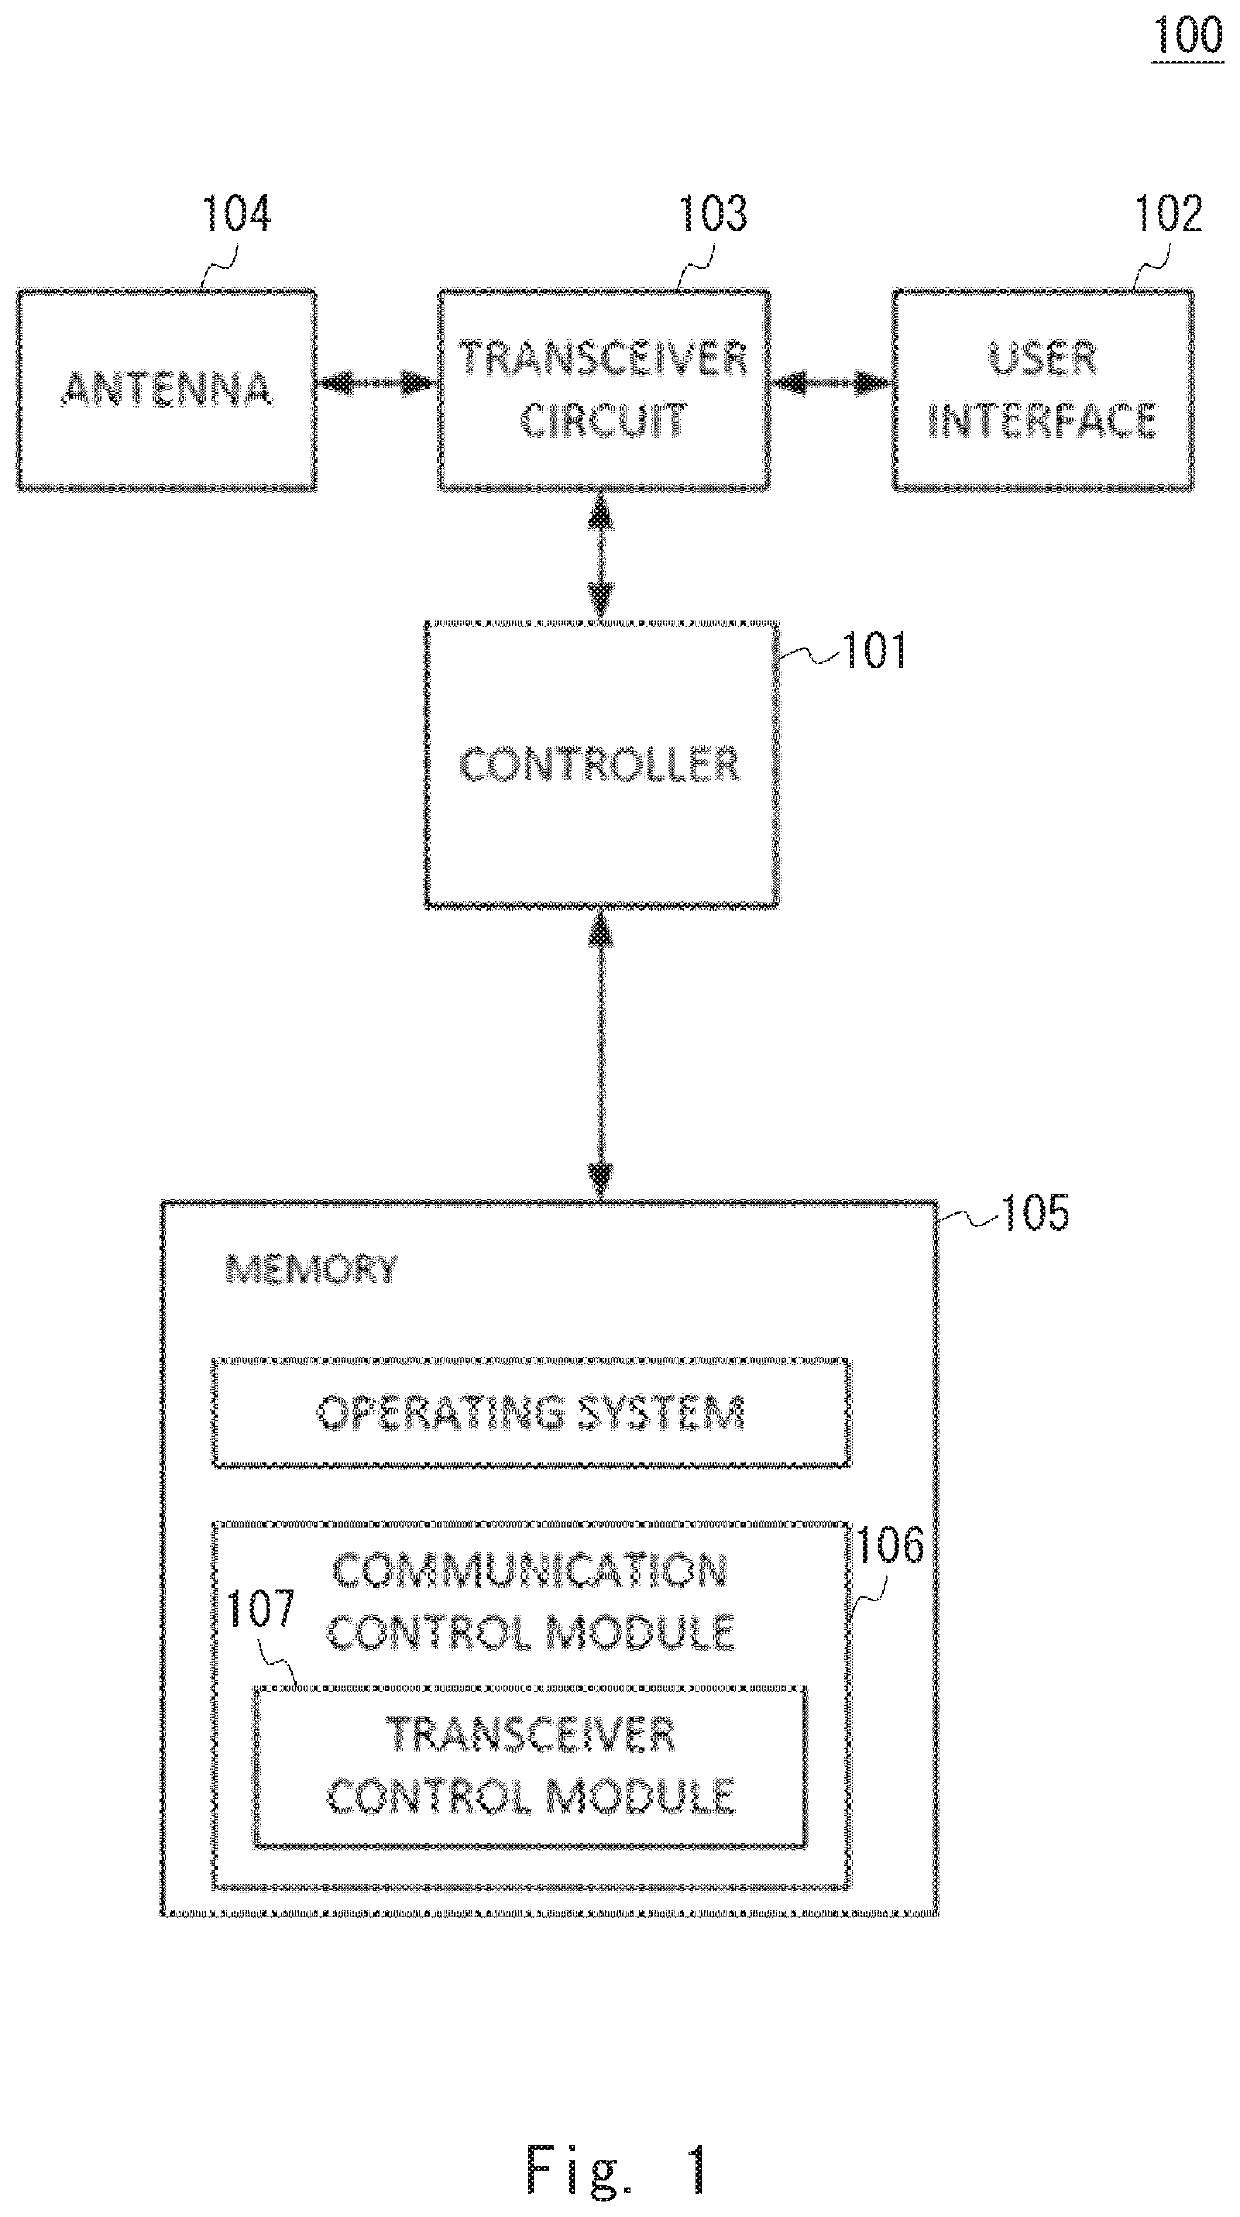 Method for synchronizing status of ue in a communication network